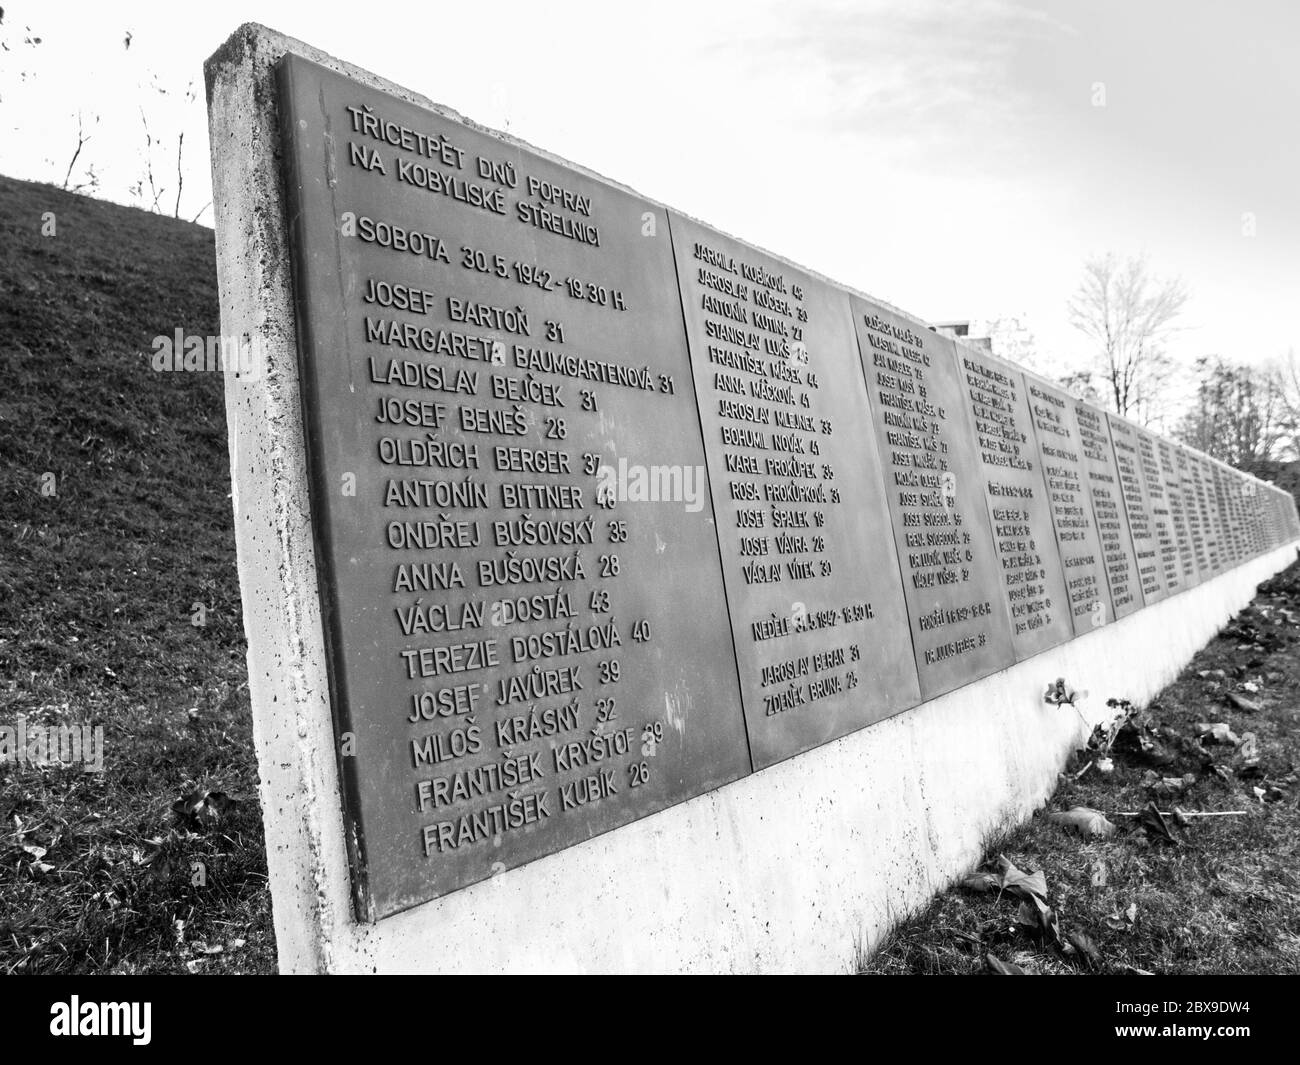 PRAGUE, CZECH REPUBLIC - DECEMBER 9, 2017: List of victims in former Kobylisy Shooting Range, Prague, Czech Republic. Place of mass executions during WWII by Nazis after the assassination of Reinhard Heydrich. Black and white image. Stock Photo